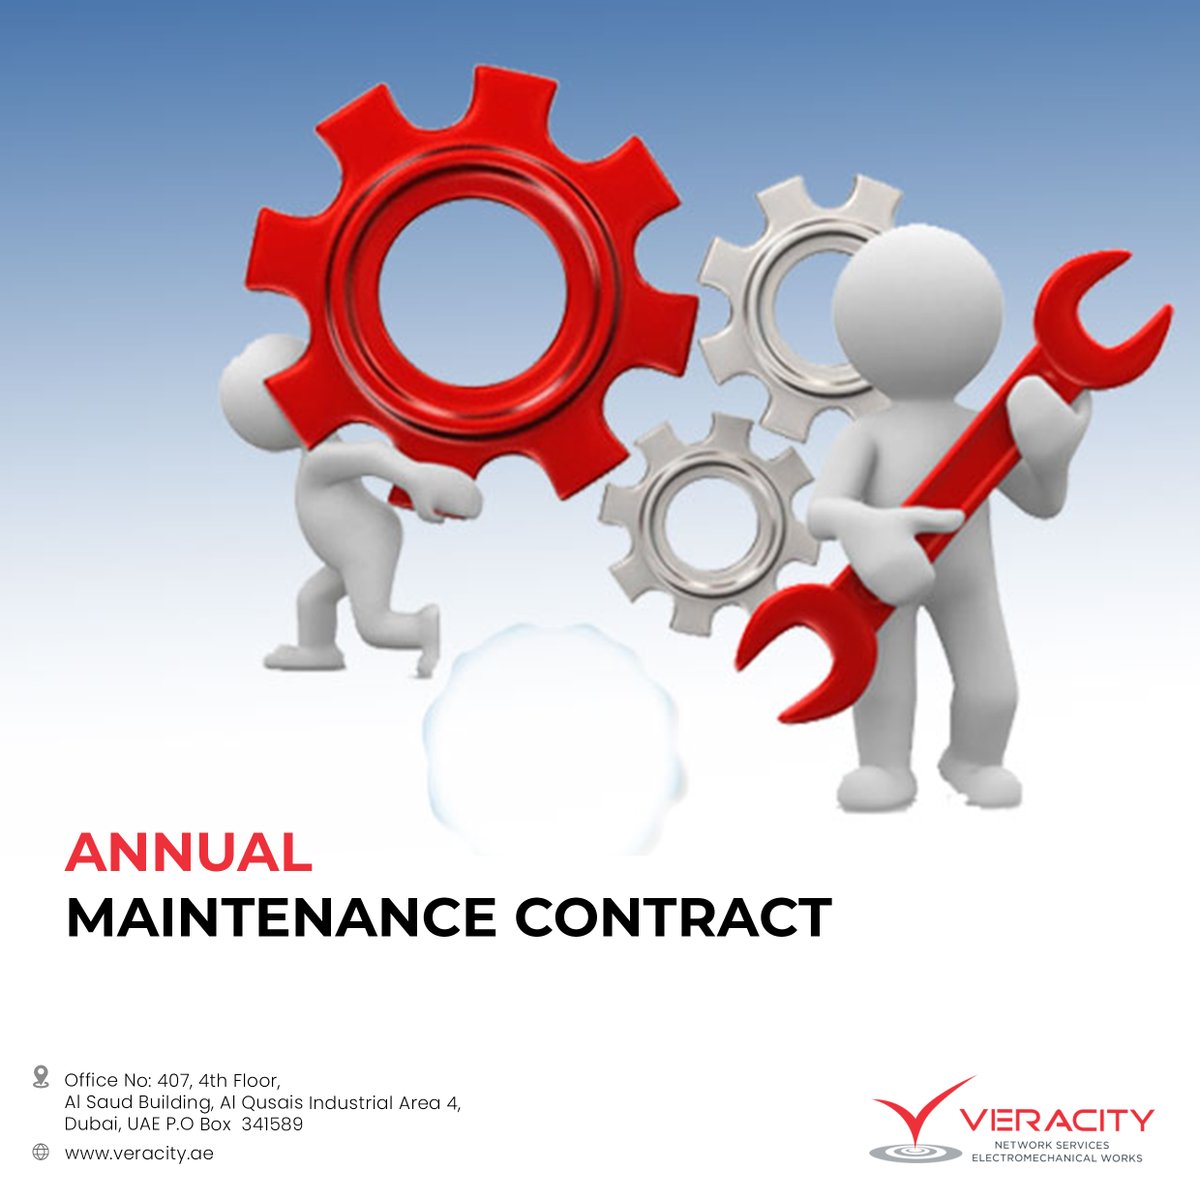 Annual maintenance contract 
#specialized #system #intergrators #ELV #contractor #construction #securitysystem #ICT #AVSystem #electromechanical #engineering #electrical #electronics #uae #design #power #robotics #engineer #publicvenues #defense #government #corporatesectors